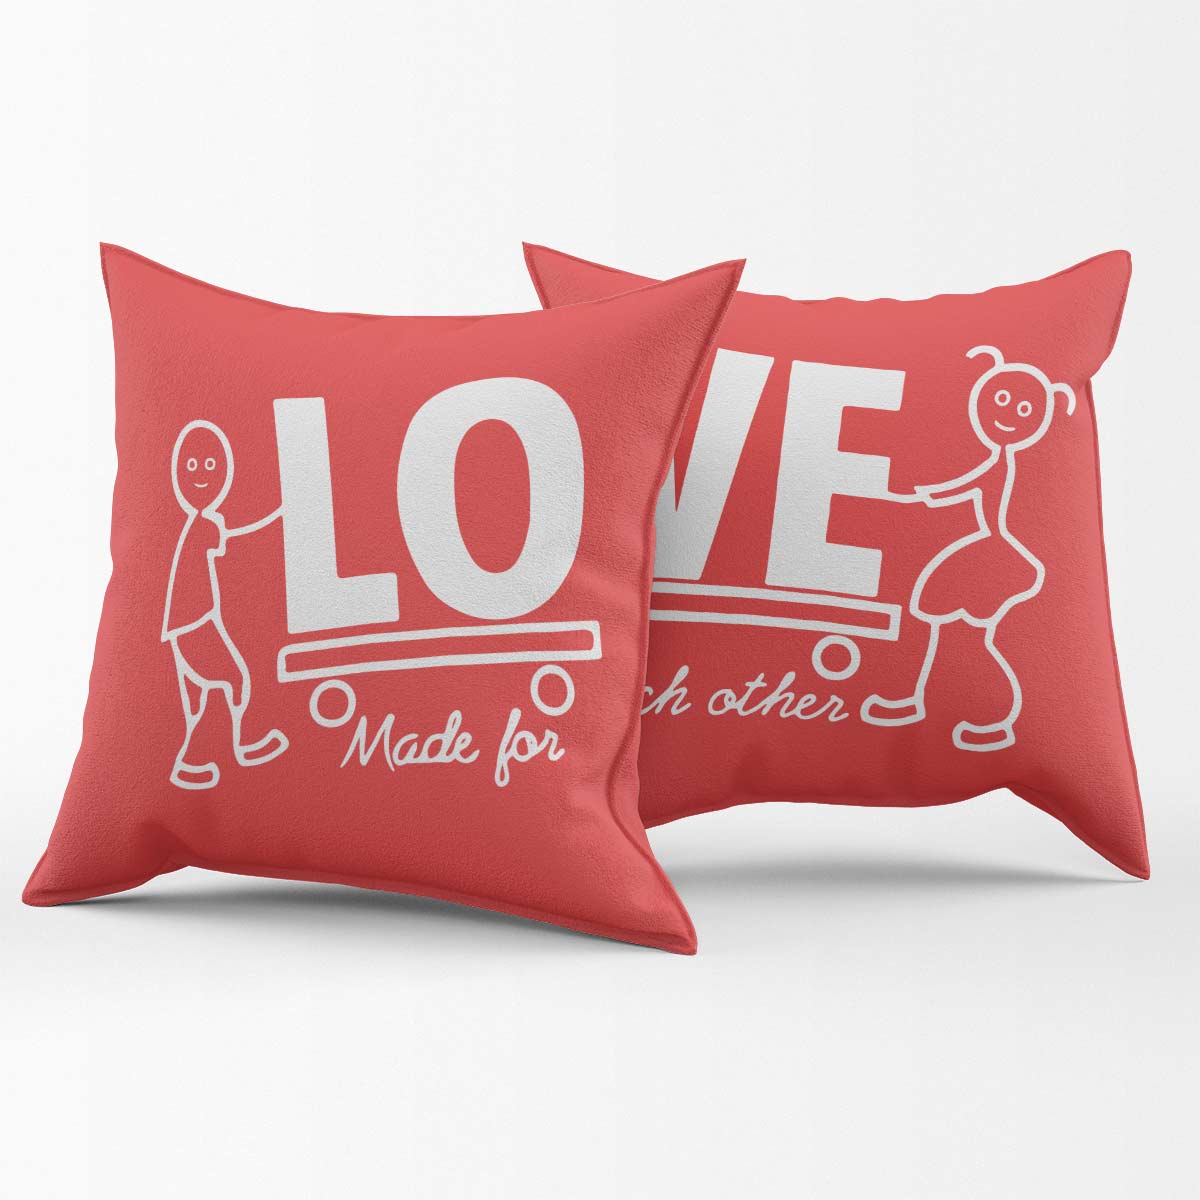 Set of 2 Made for Each Other Cushion